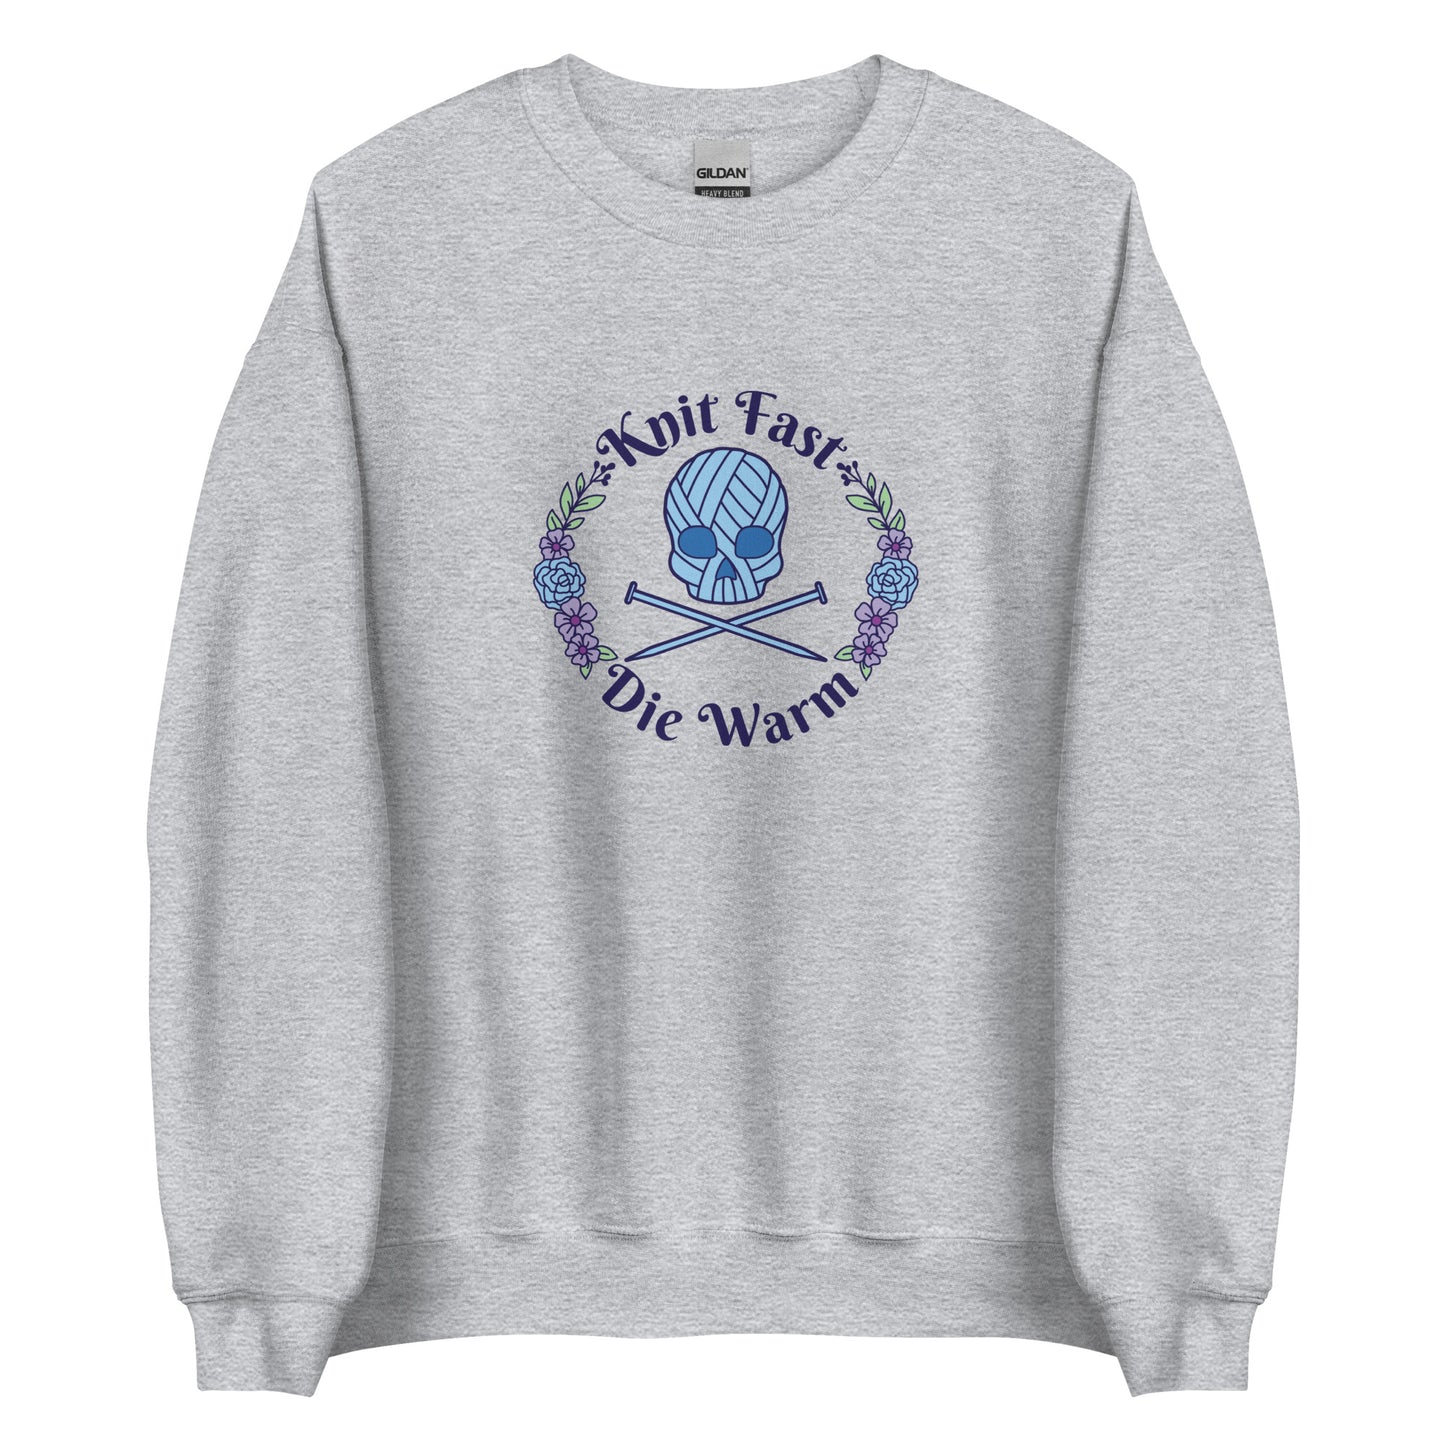 A gray crewneck sweatshirt featuring an image of a skull and crossbones made of yarn and knitting needles. A floral wreath surrounds the skull, along with words that read "Knit Fast, Die Warm"